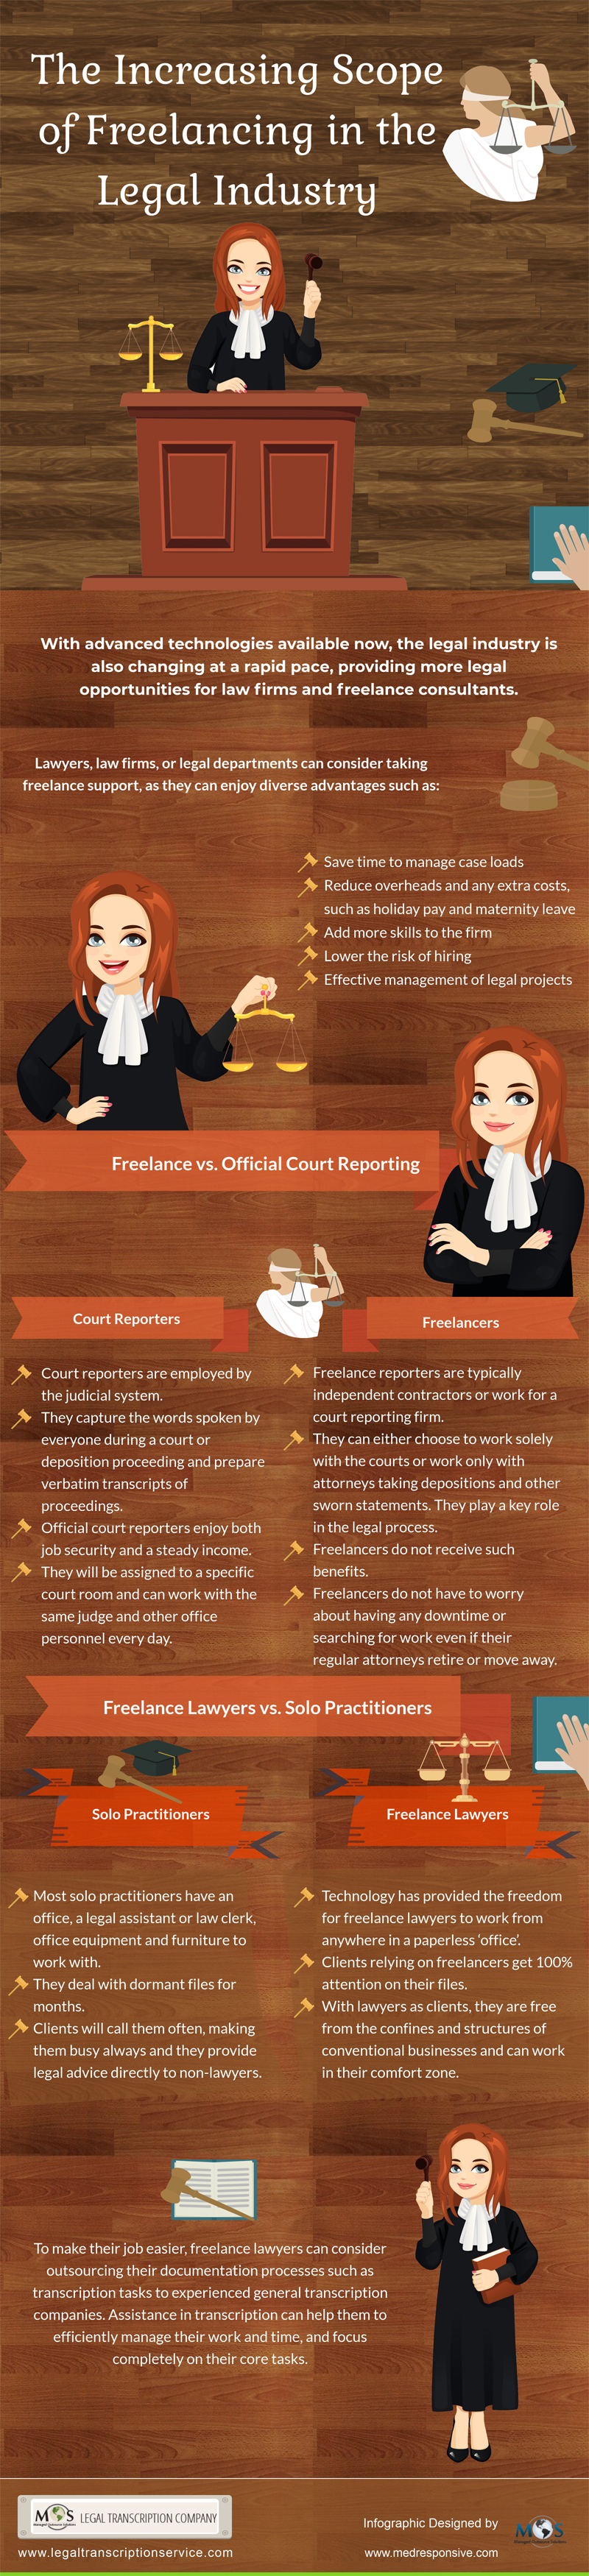 Scope of Freelancing in the Legal Industry